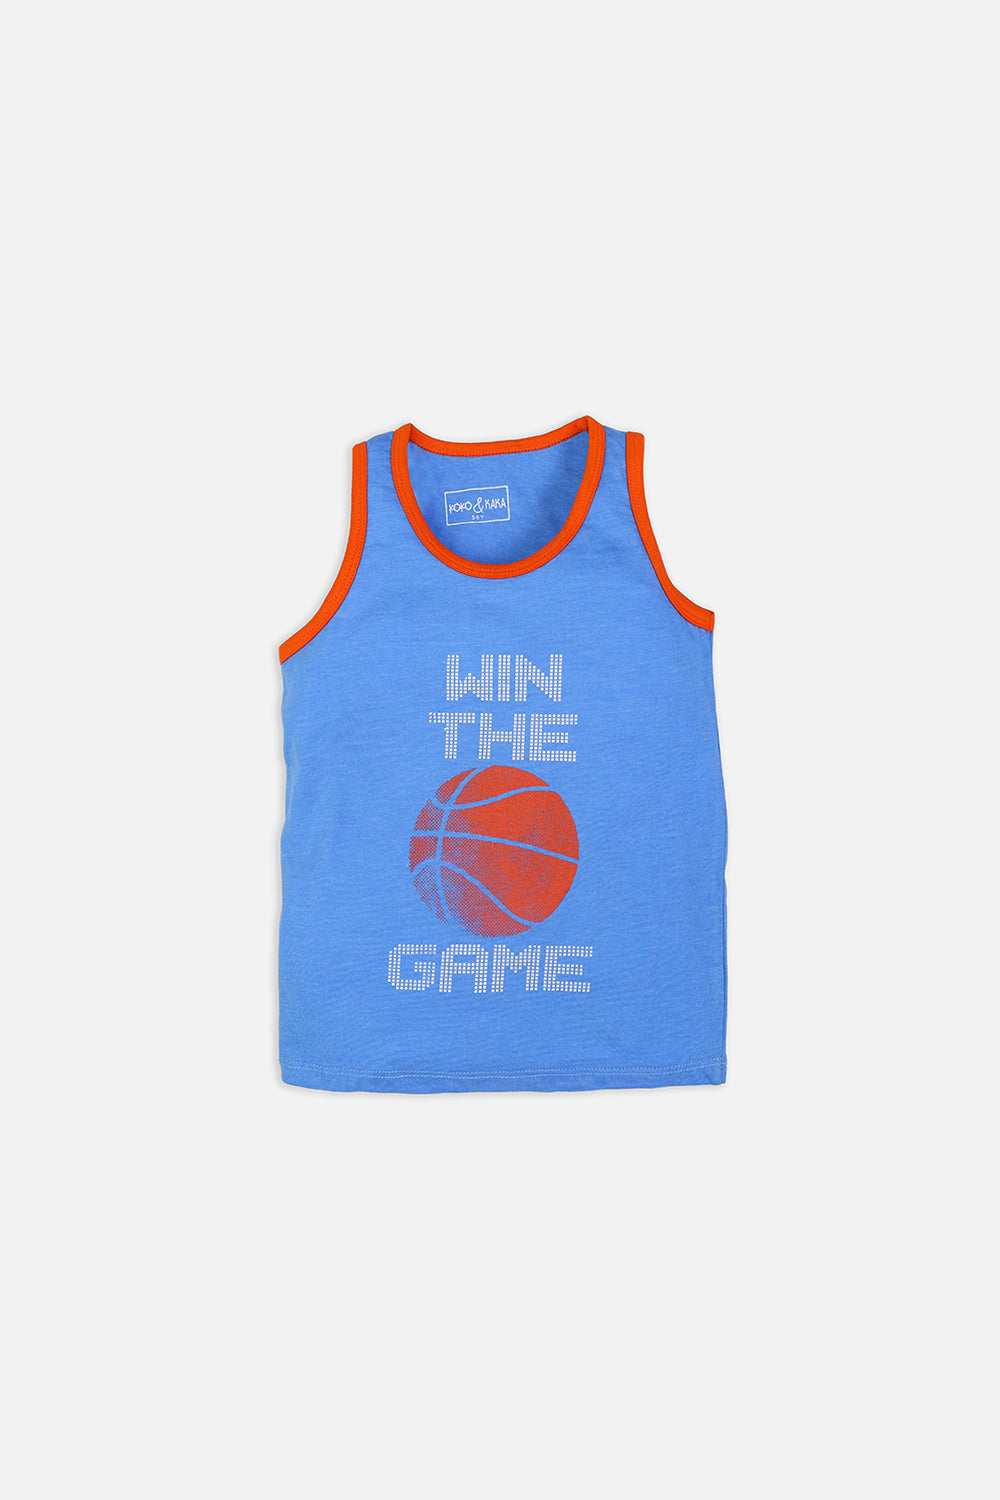 Basket ball graphic tank top 100% cotton jersey fabric